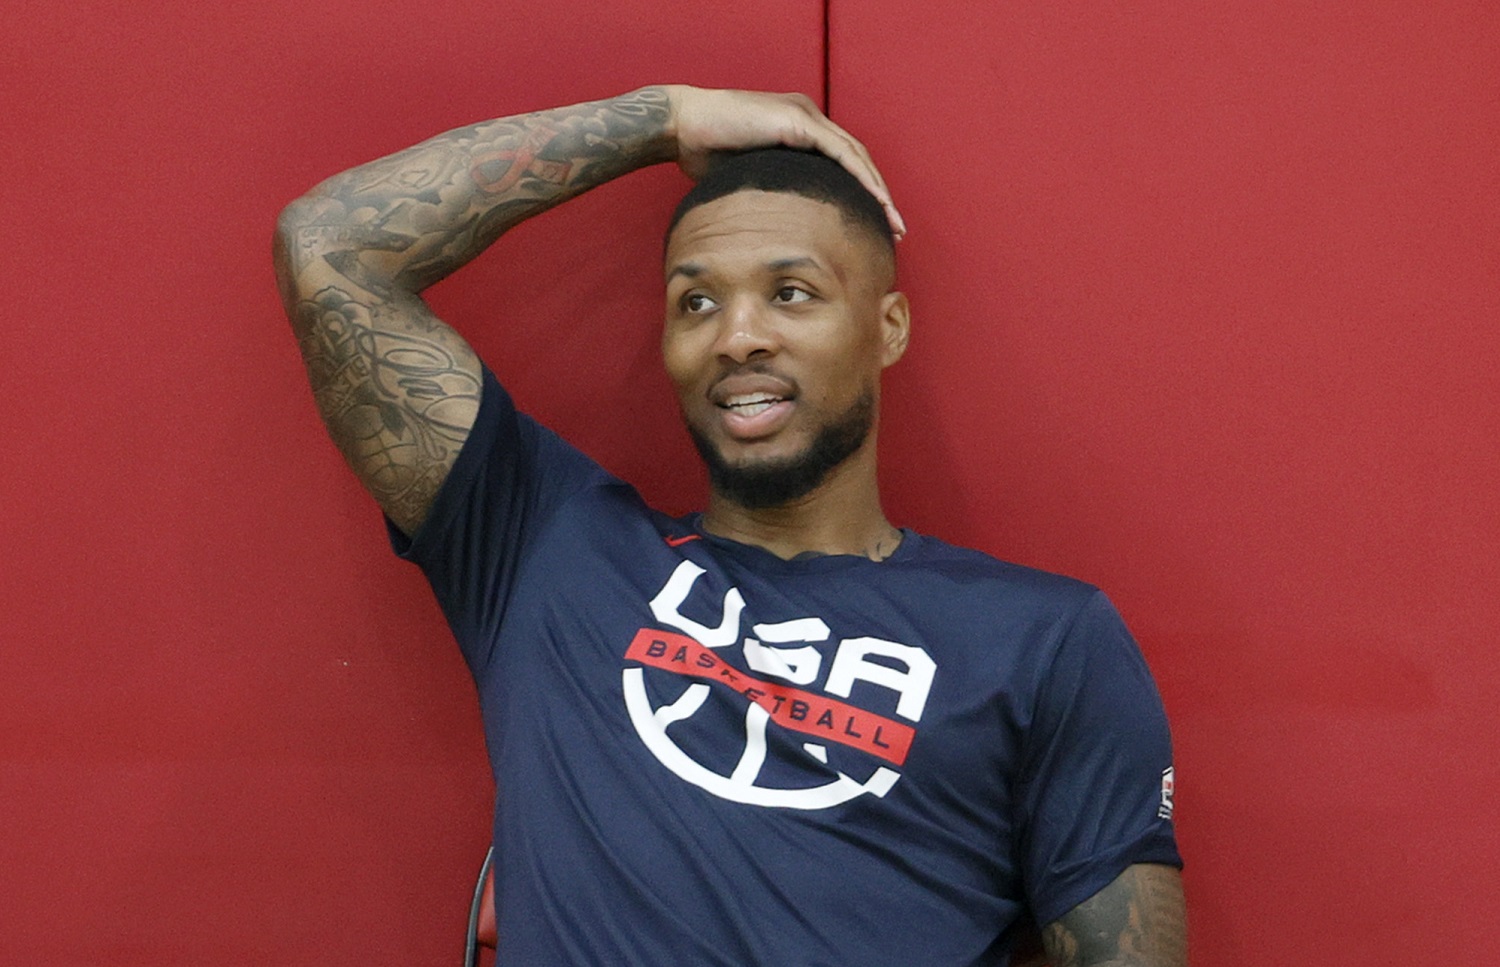 Damian Lillard of the USA Basketball Men's National Team rests after a practice at the Mendenhall Center at UNLV.